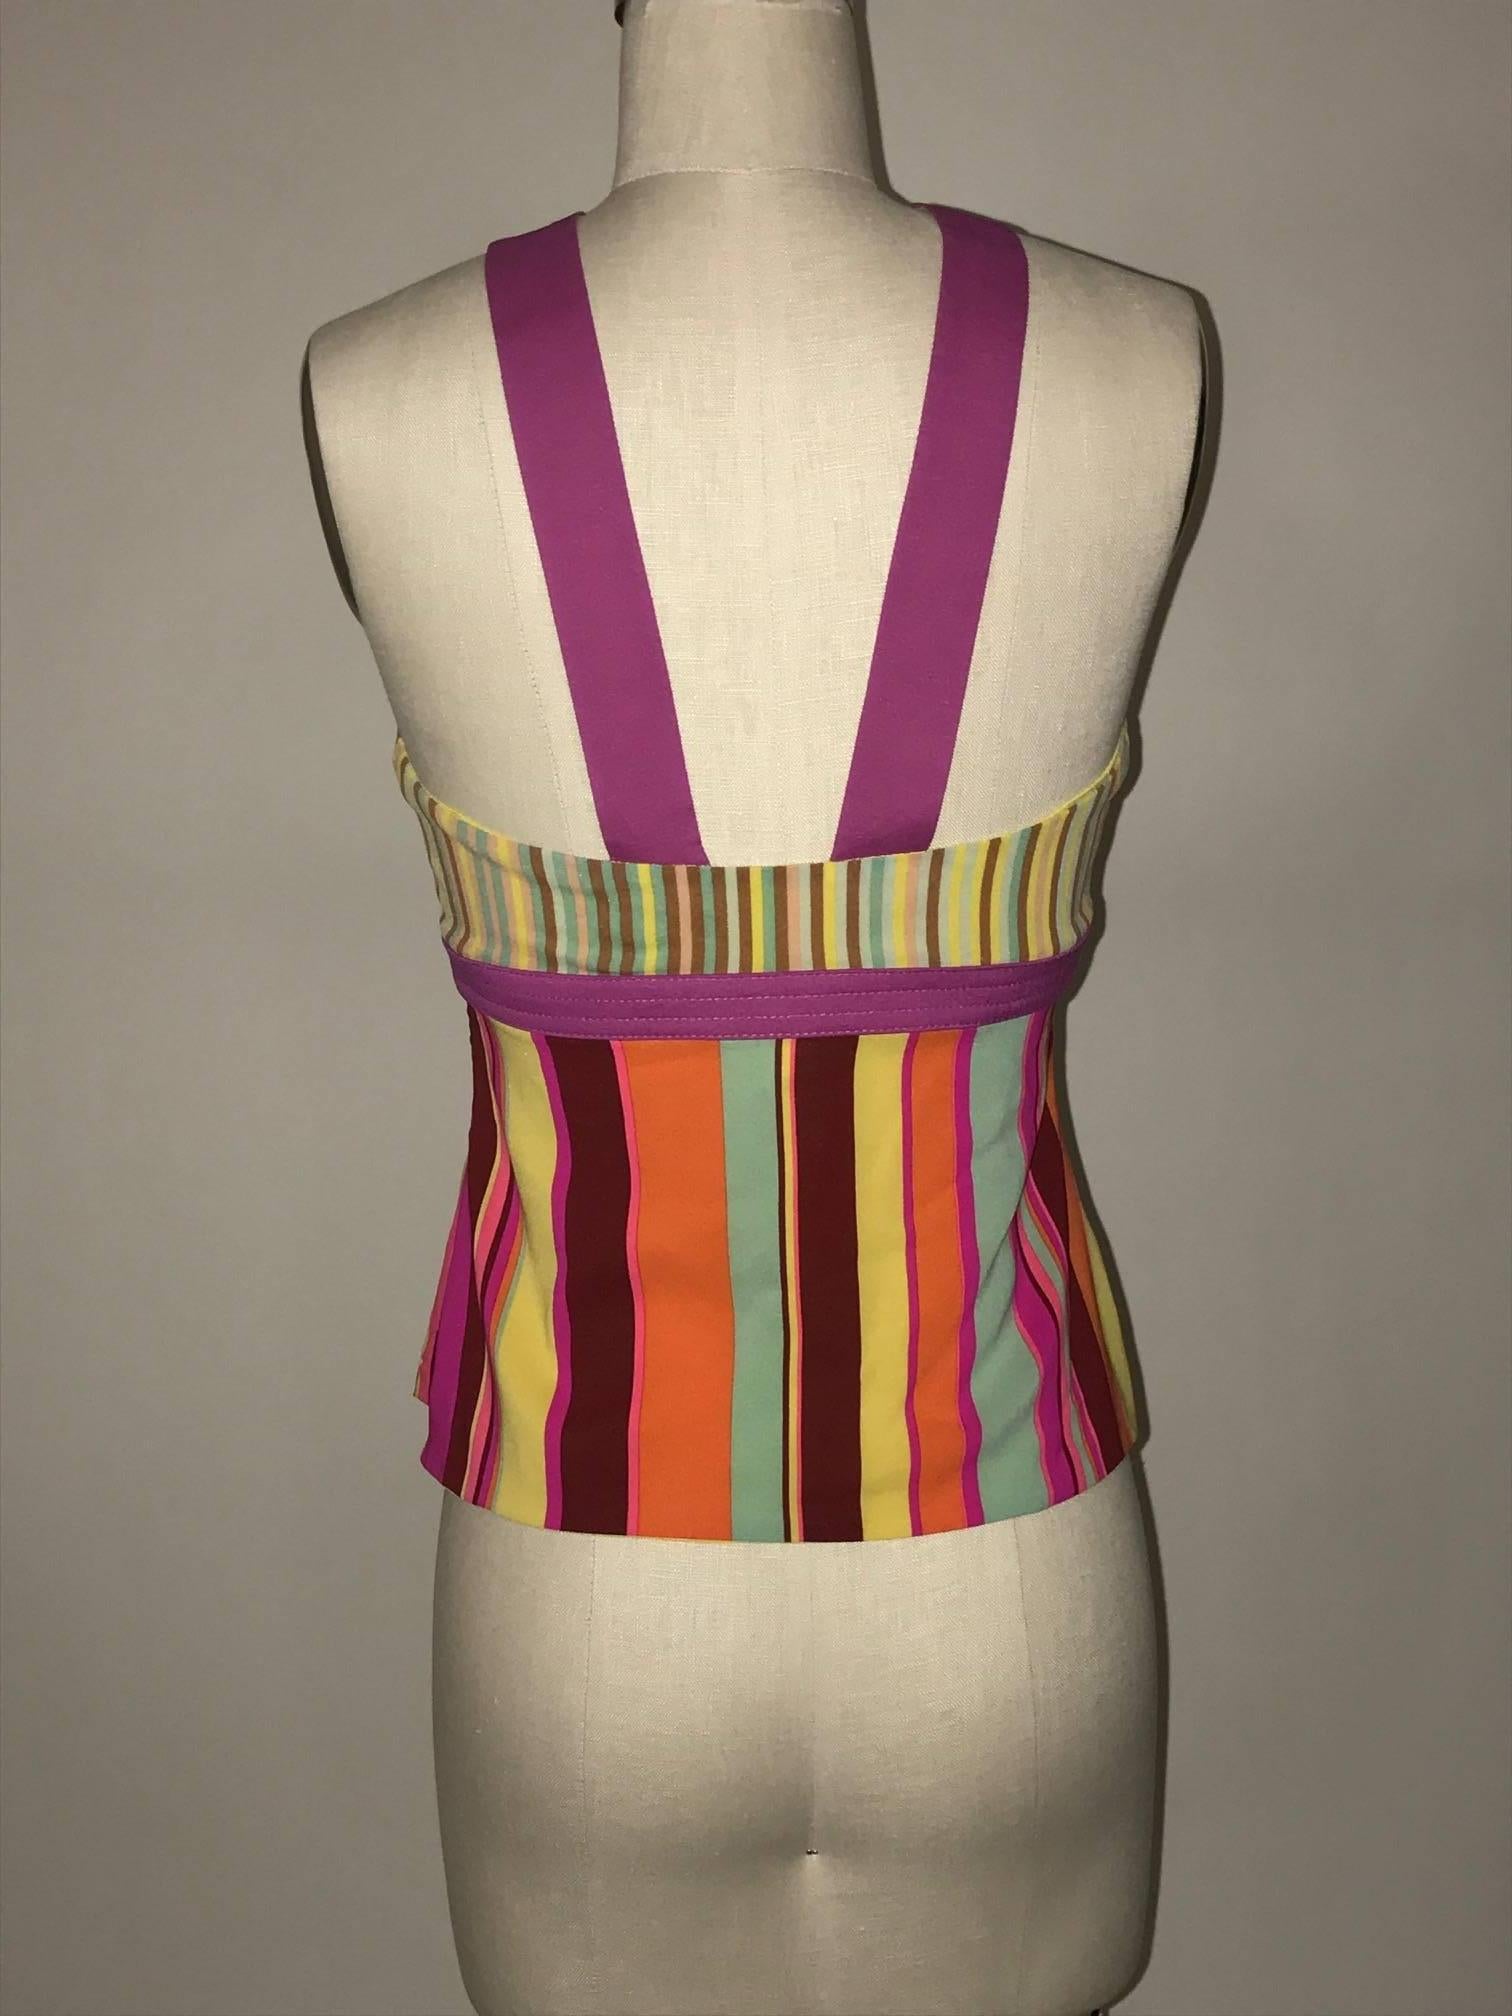 Gianni Versace Couture 1990s multi color striped tank top with magenta colored harness halter detail. Side zip. 

93% silk, 7% elastane.
Fully lined.

Made in Italy

Size IT 42, US 6, fits more like modern 2, see measurements.
Bust 29".
Waist